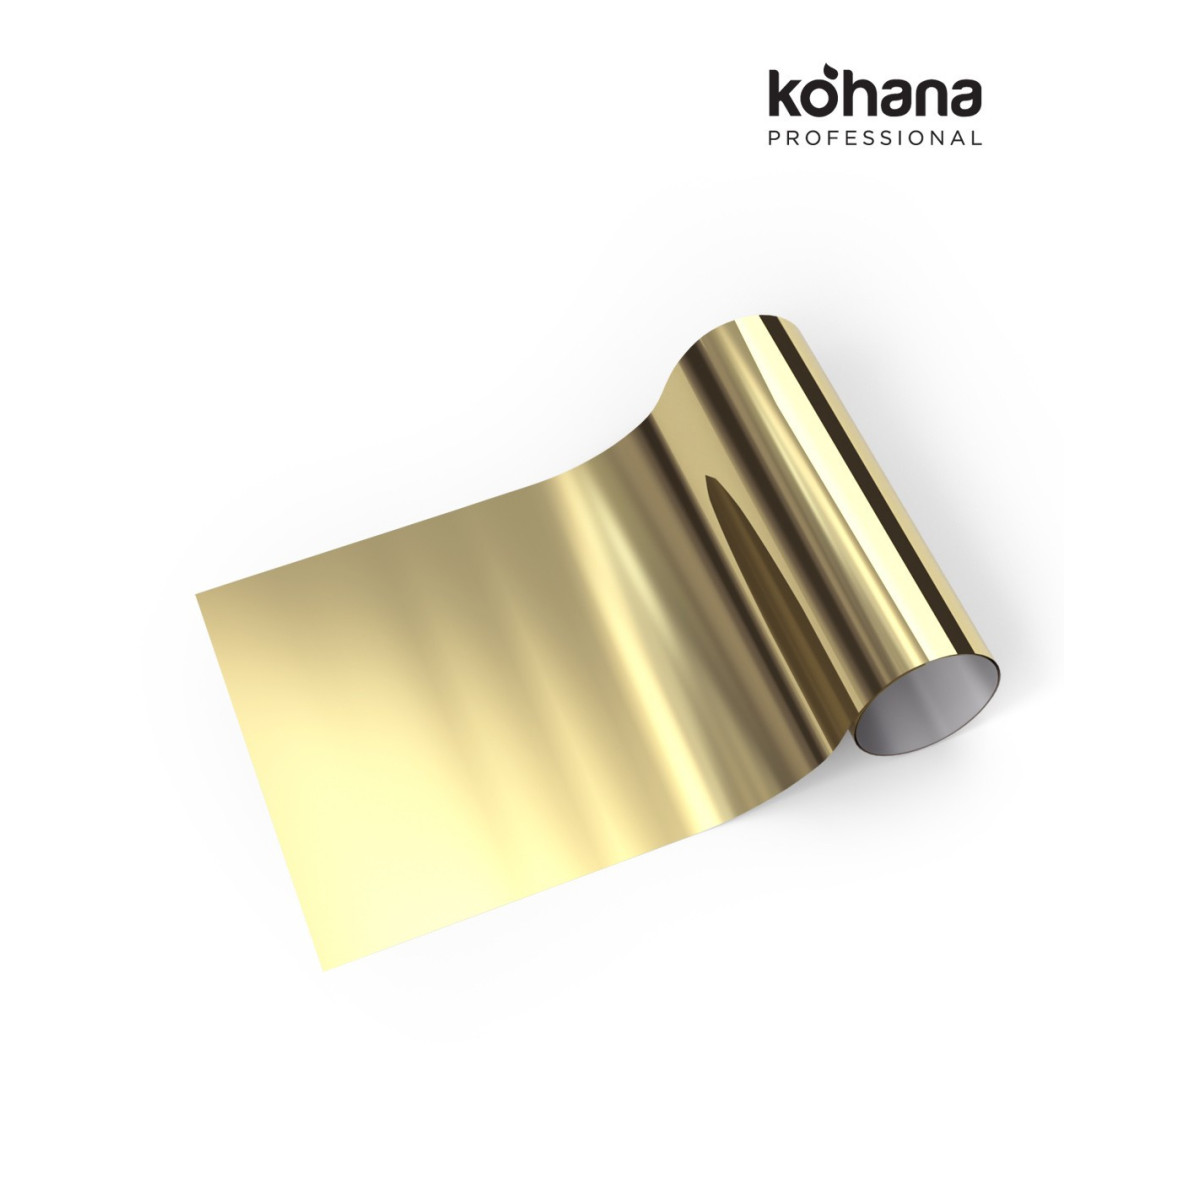 Kohana transfer foil light gold available in our store in Ireland